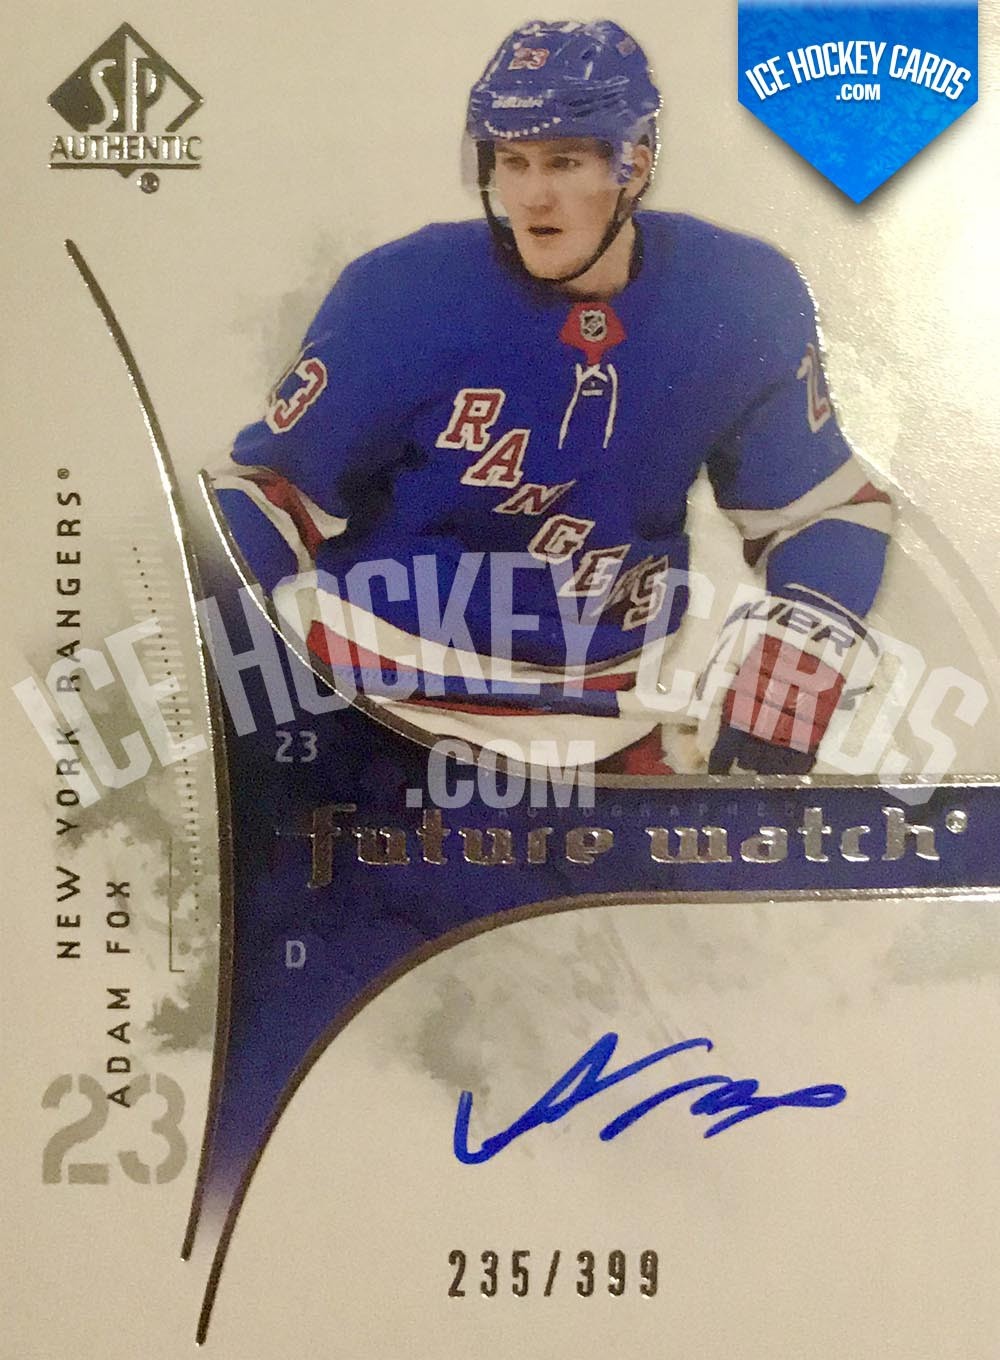  2019-20 Upper Deck SP #129 Adam Fox RC Rookie Card SER/1999 New  York Rangers Official NHL Hockey Card in Raw (NM or Better) Condition :  Collectibles & Fine Art